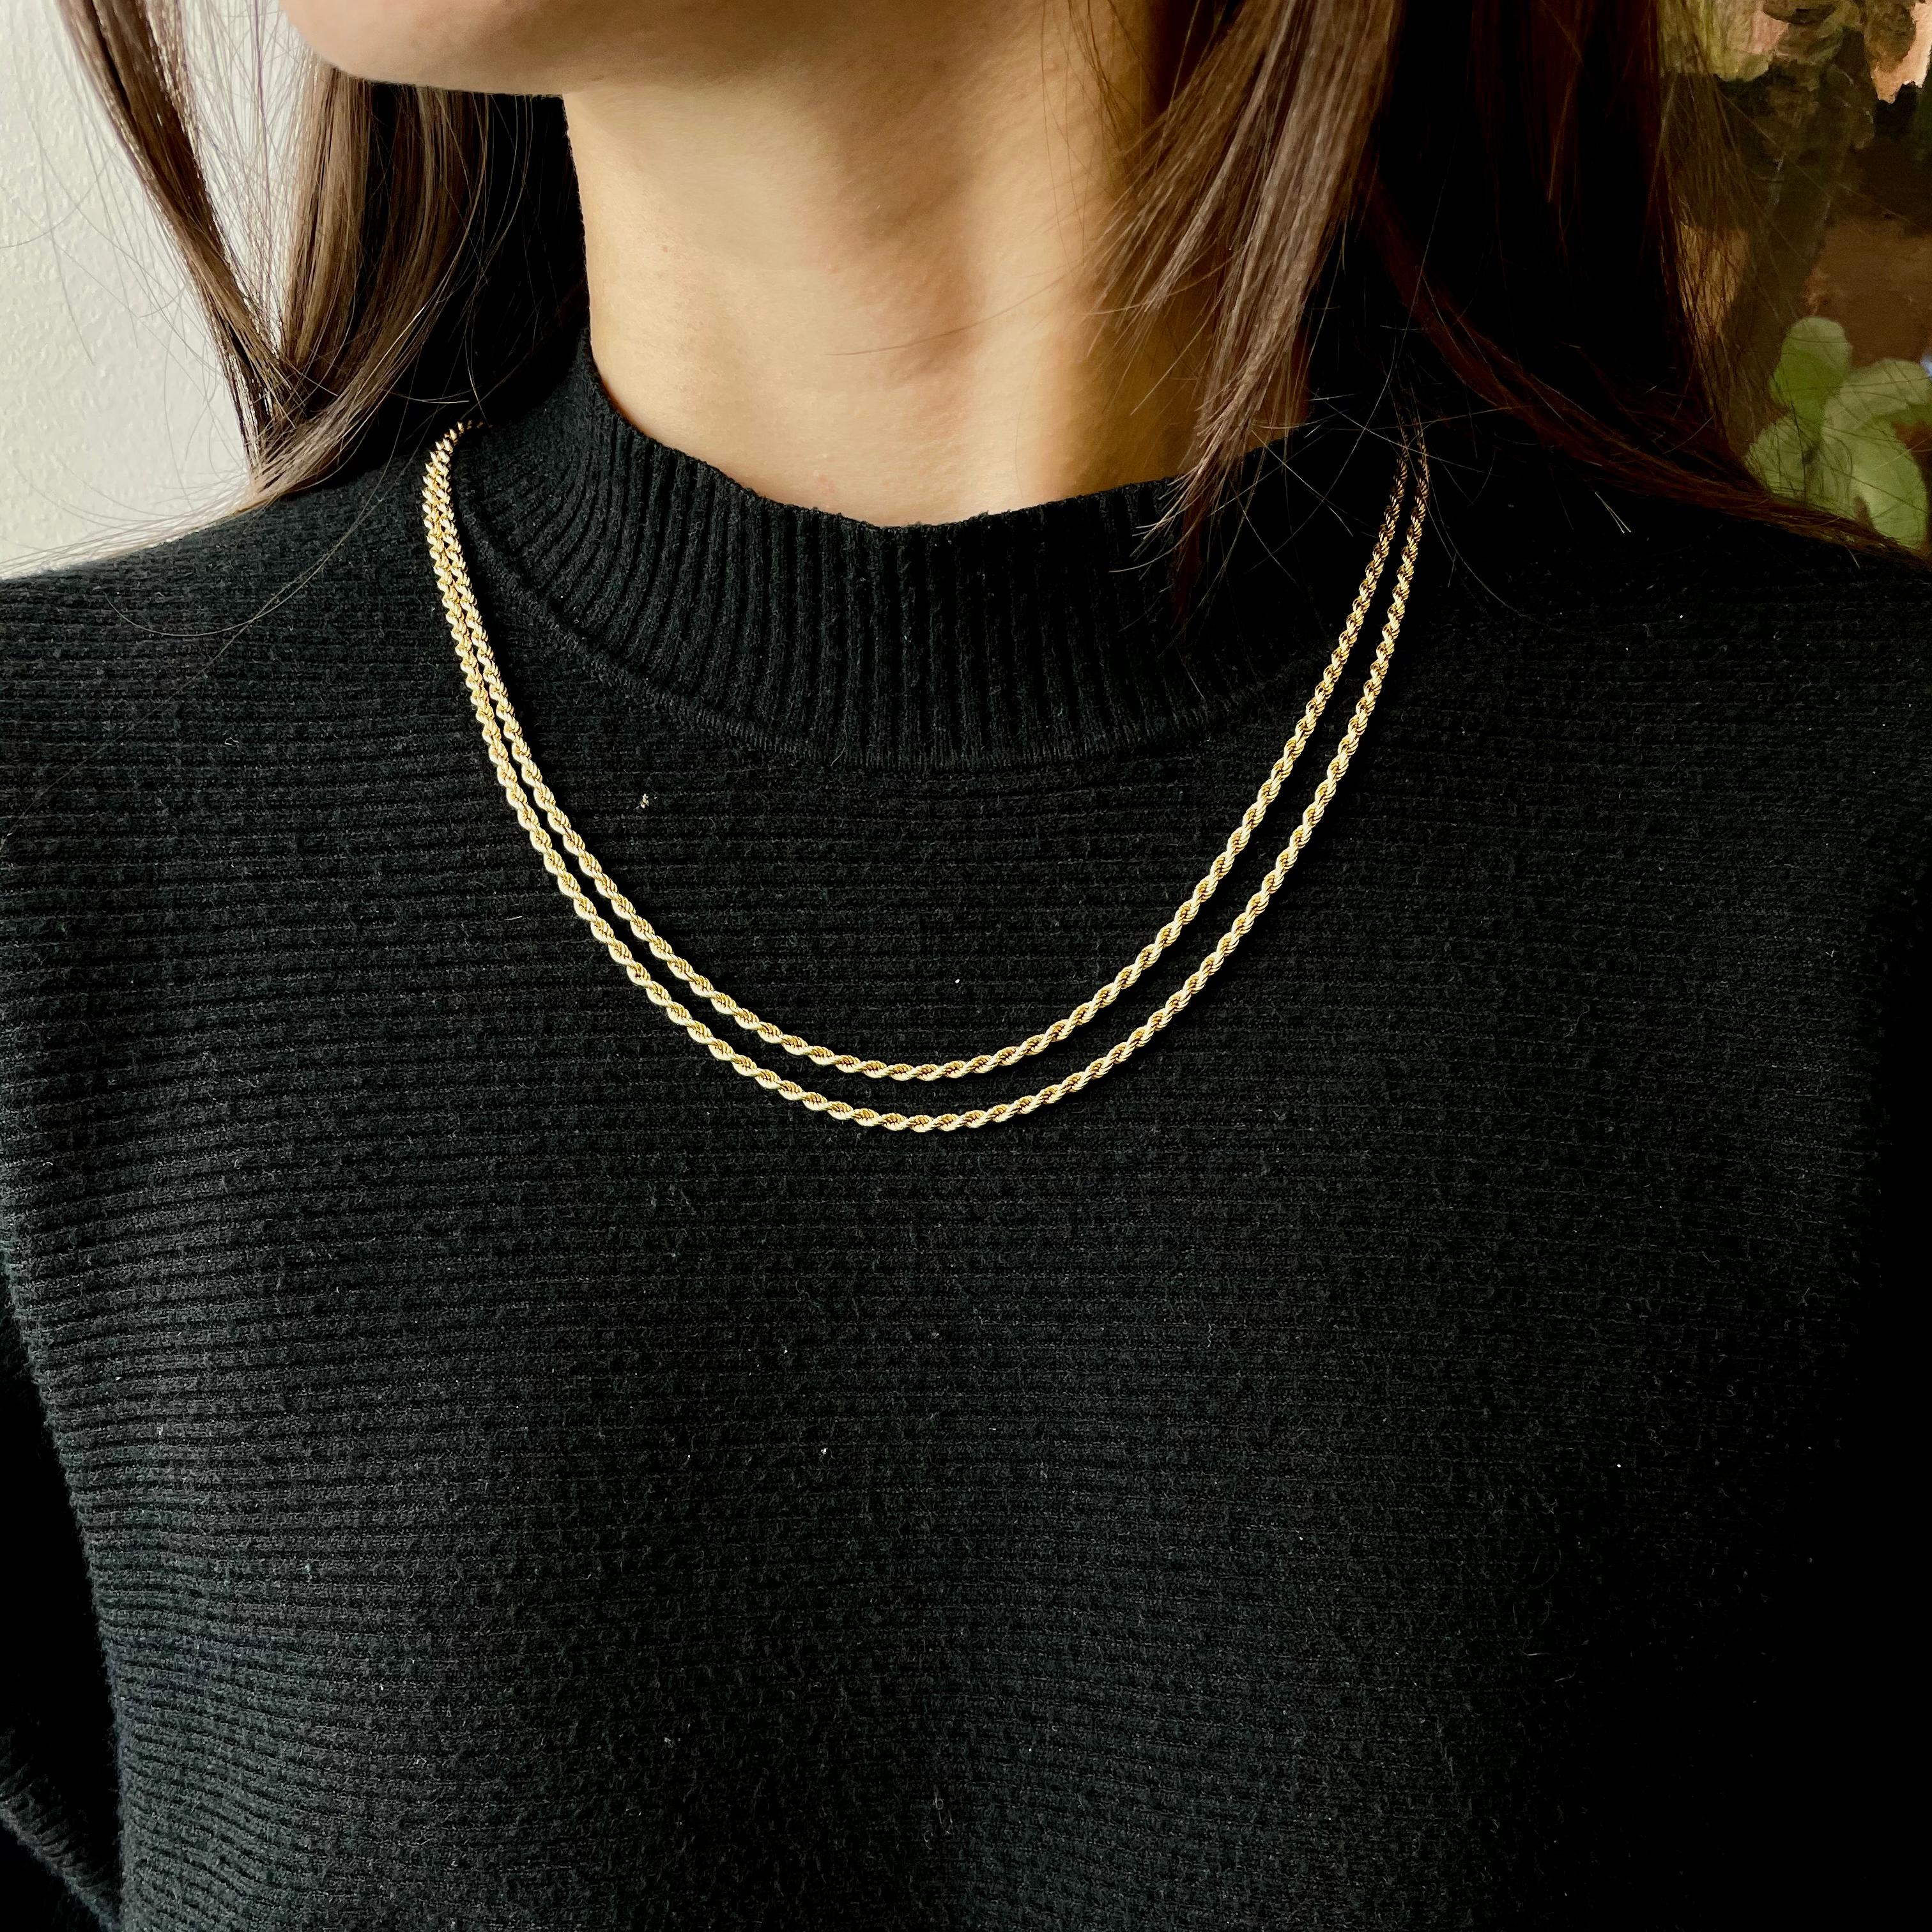 True vintage jewelry lovers are on a hunt for these unique gold chain necklaces! They hold historical value and can be worn nowadays as is or with various antique pendants. Rare and charming, this Vintage Italian 18k Gold Rope Chain is a must-have!